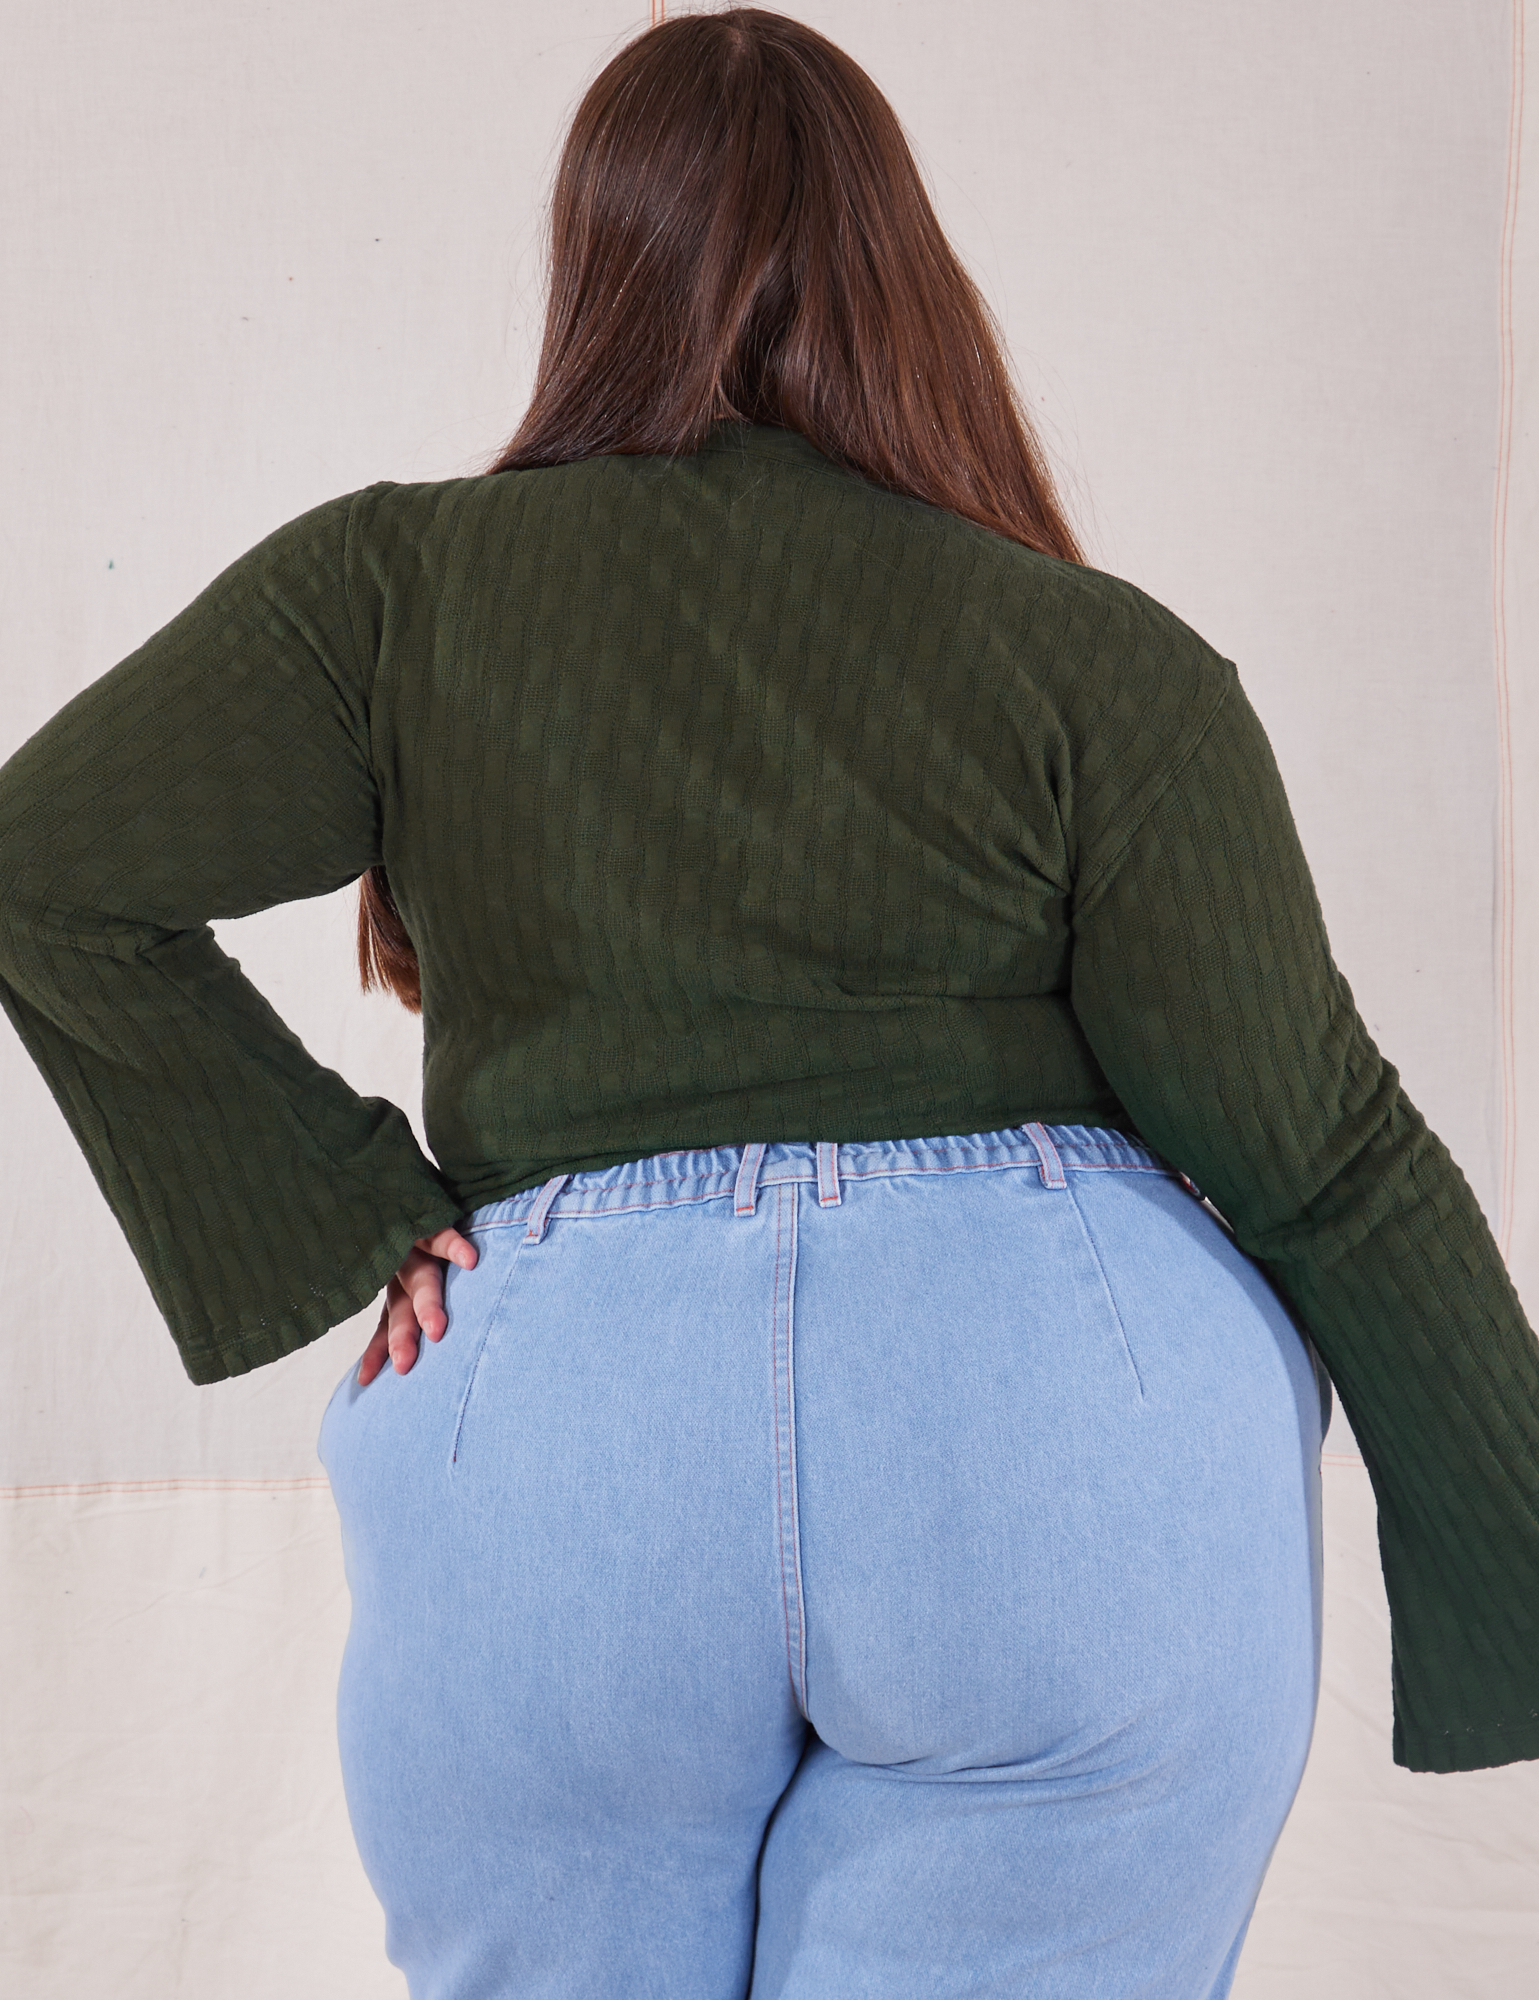 Bell Sleeve Top in Swamp Green back view on Marielena